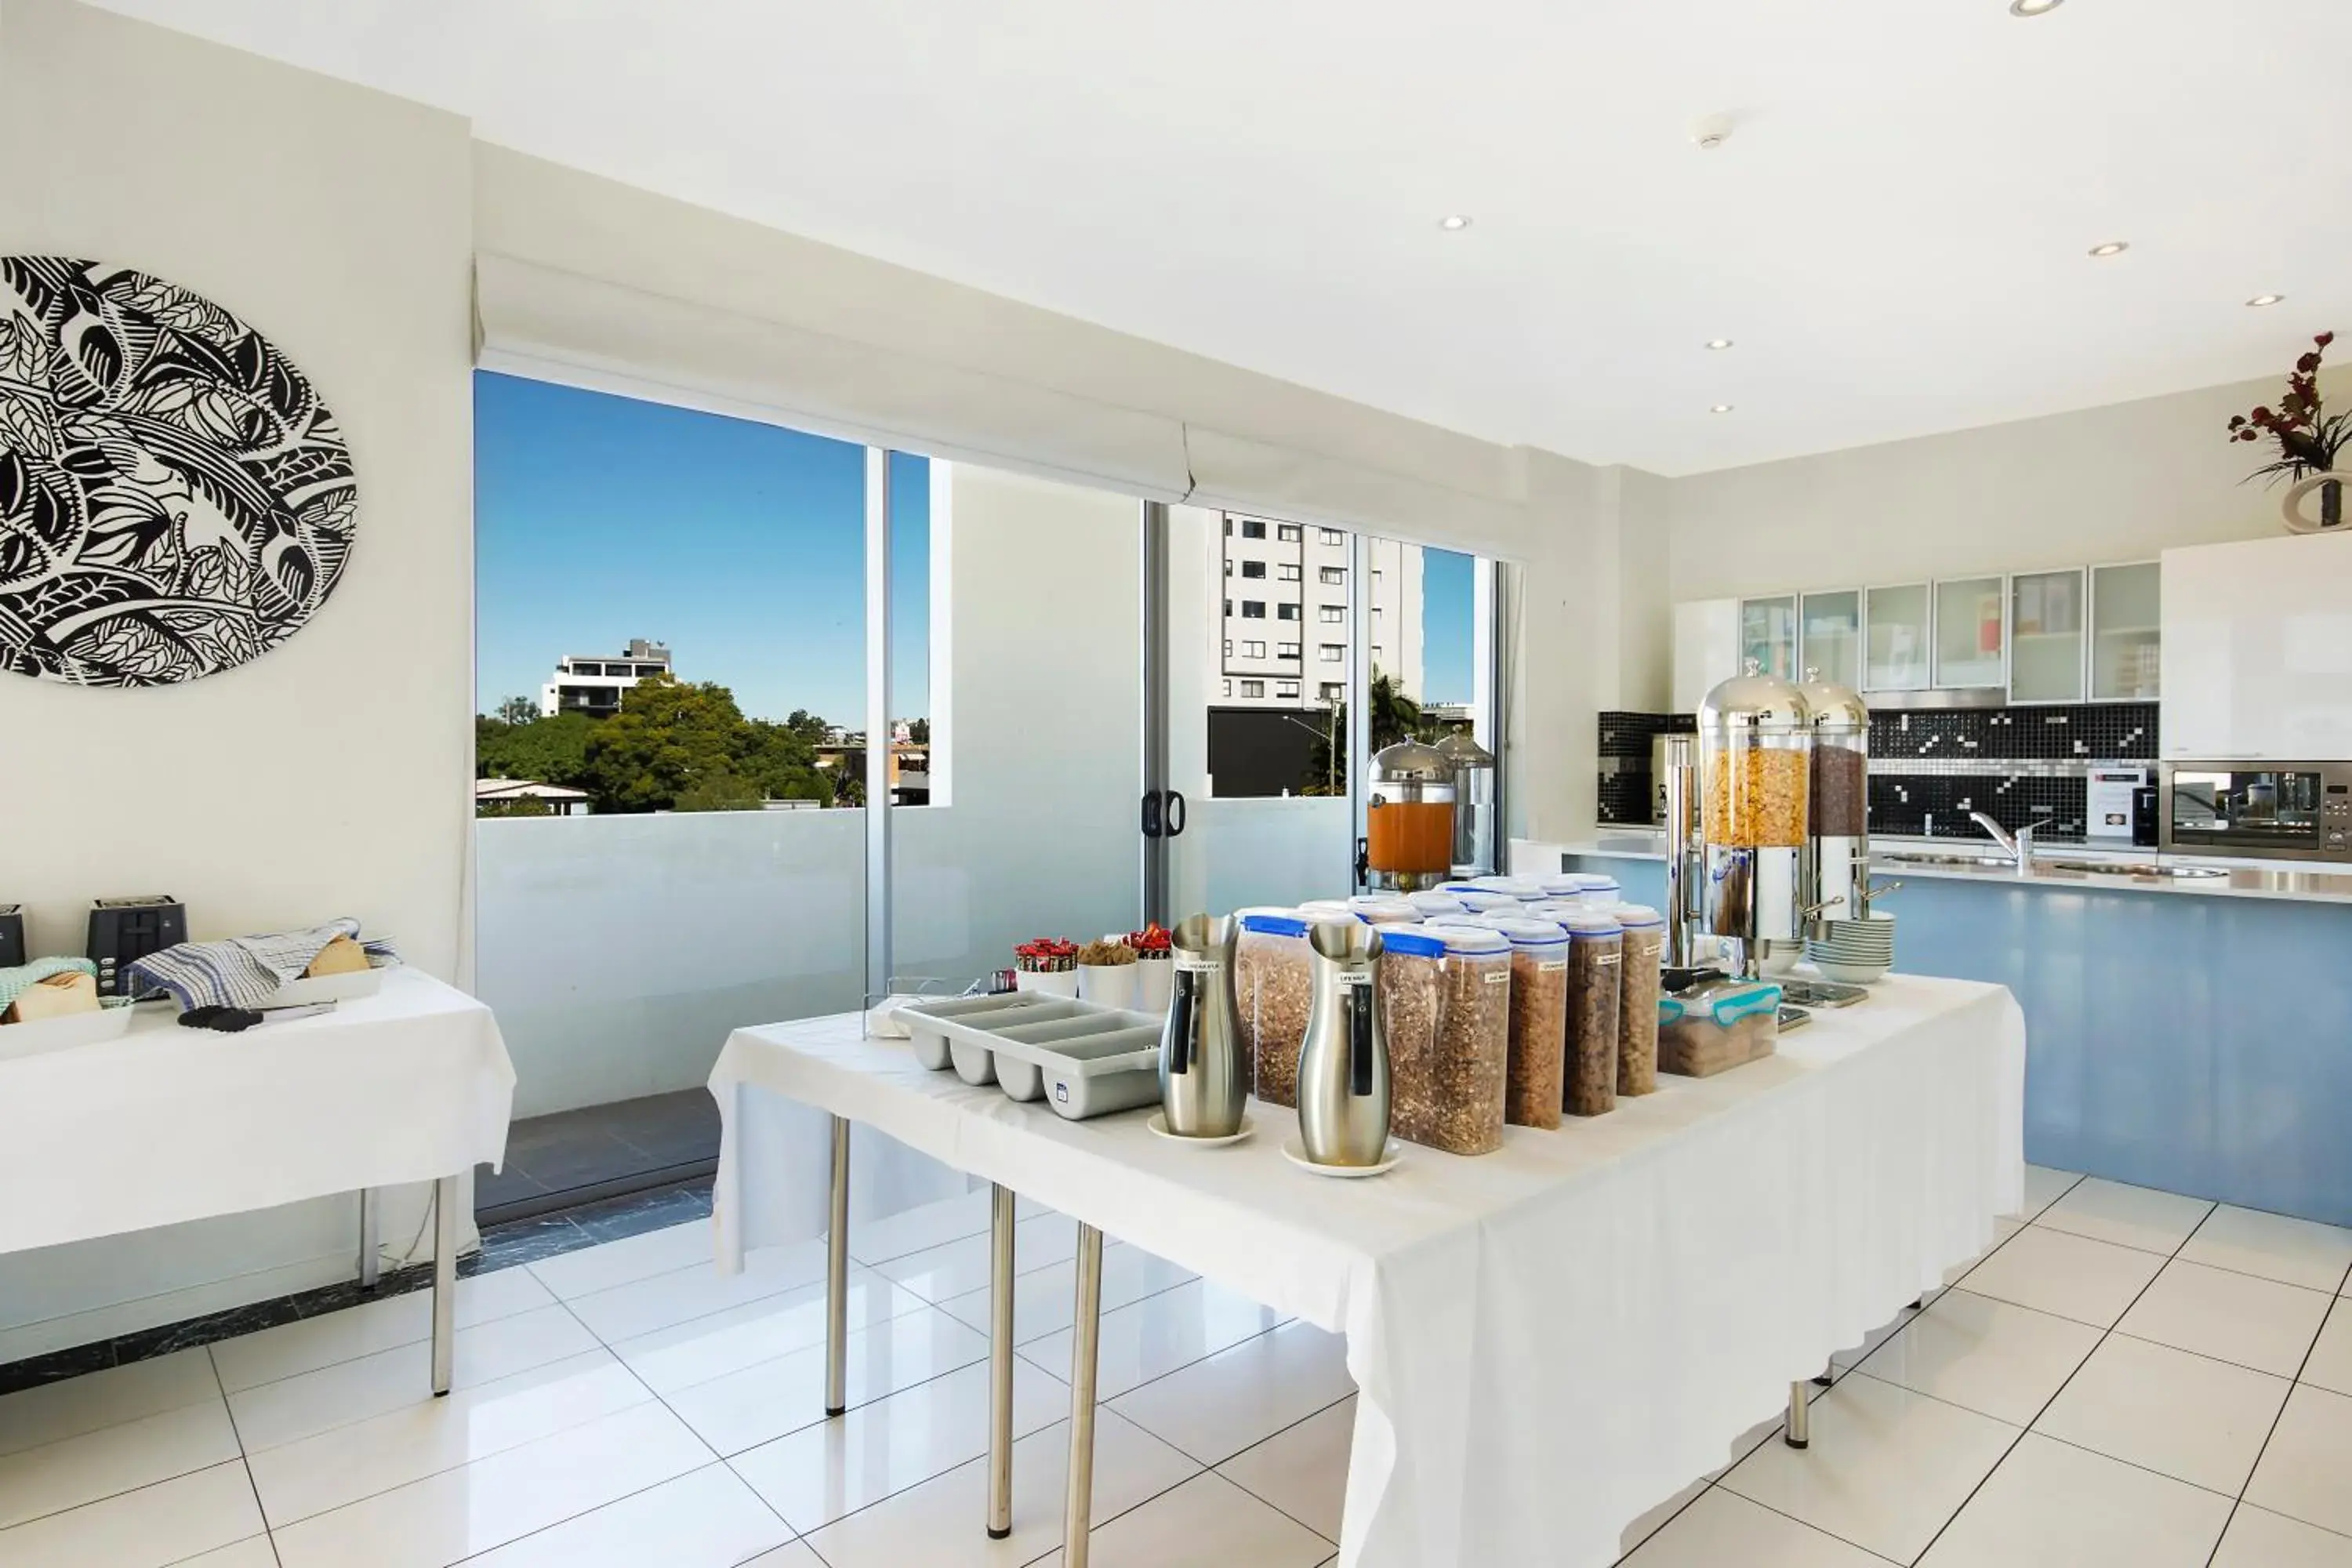 Continental breakfast in The Chermside Apartments